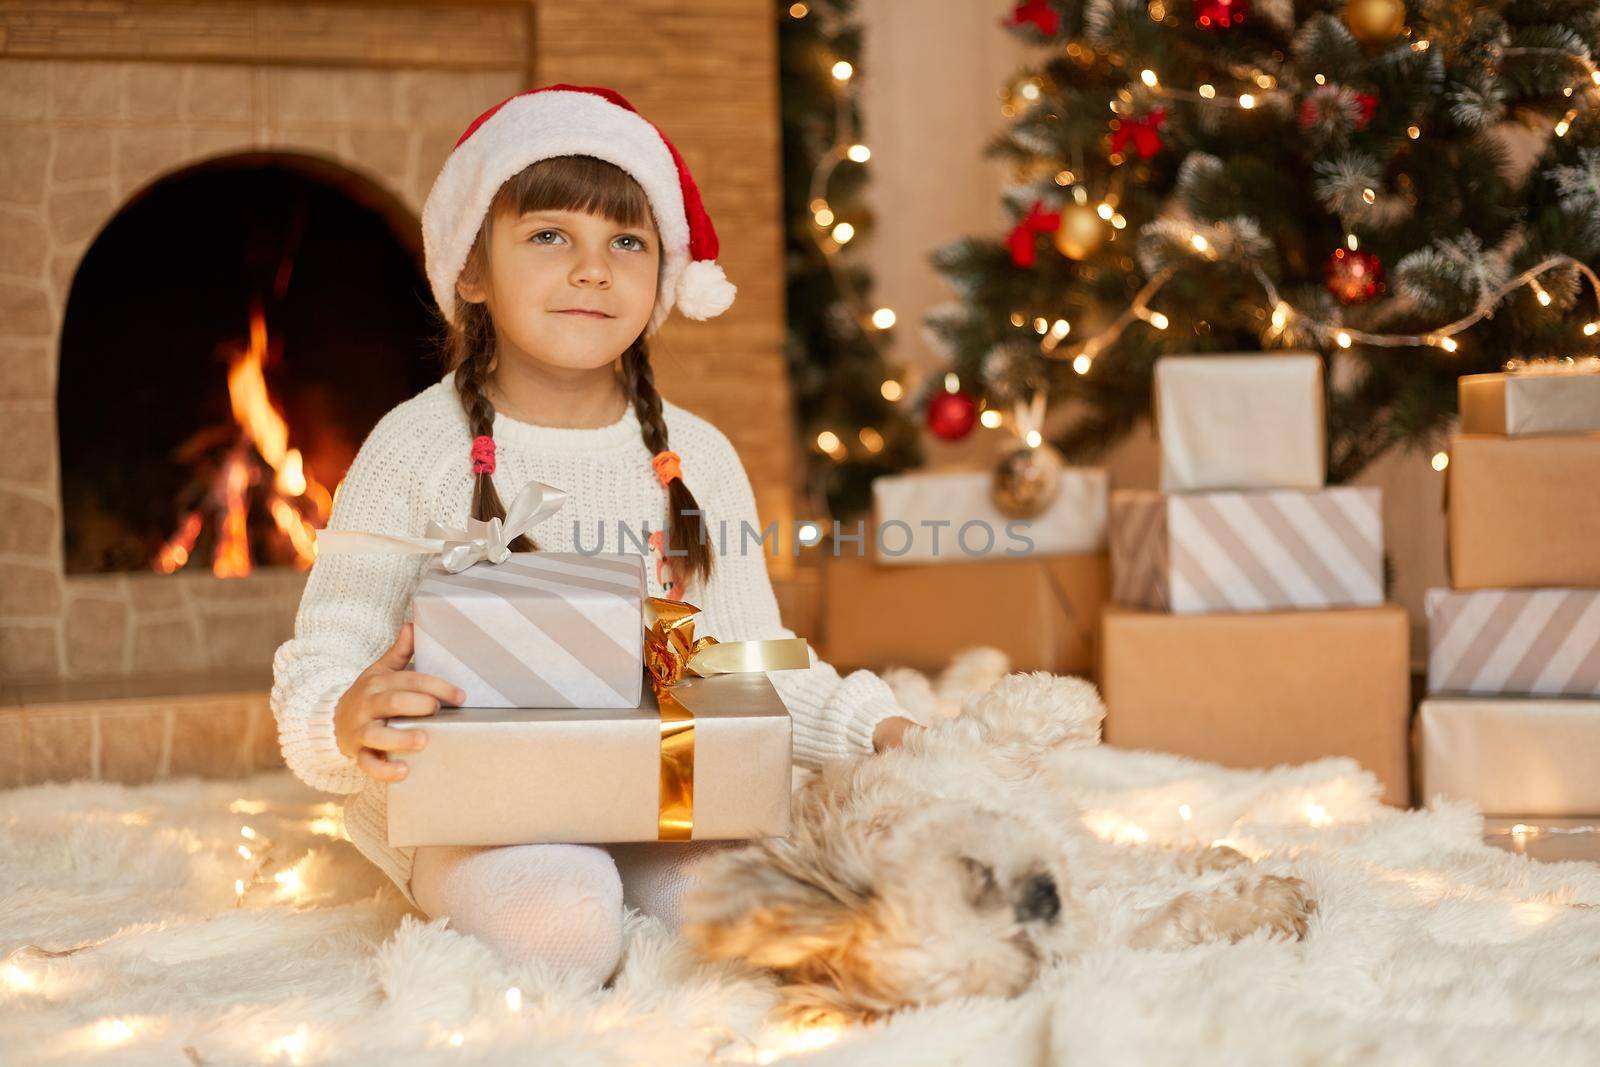 Pensive little child sitting on floor and looking away, holding gift boxes with ribbon, imaging her present, posing in decorating living room with garland, christmas tree and fireplace.